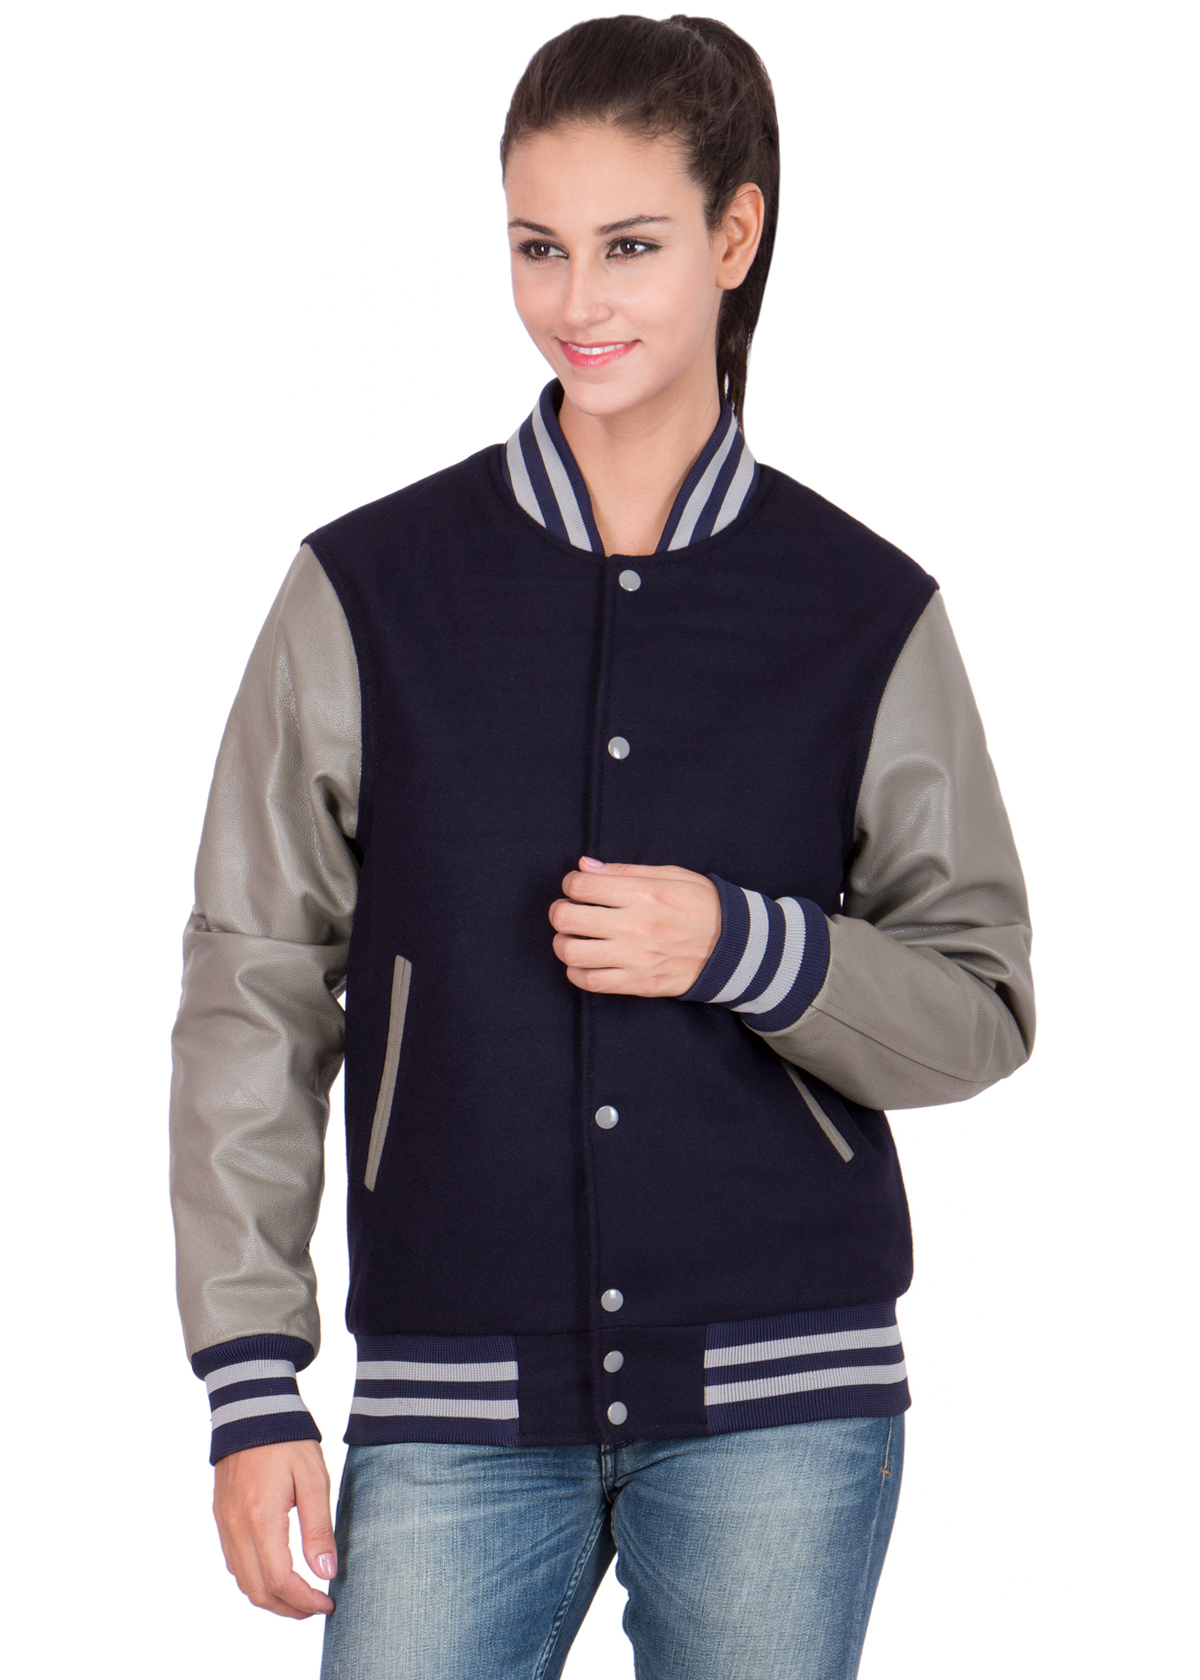 Navy Blue Letterman Jacket with Grey Leather Sleeves - Graduation SuperStore